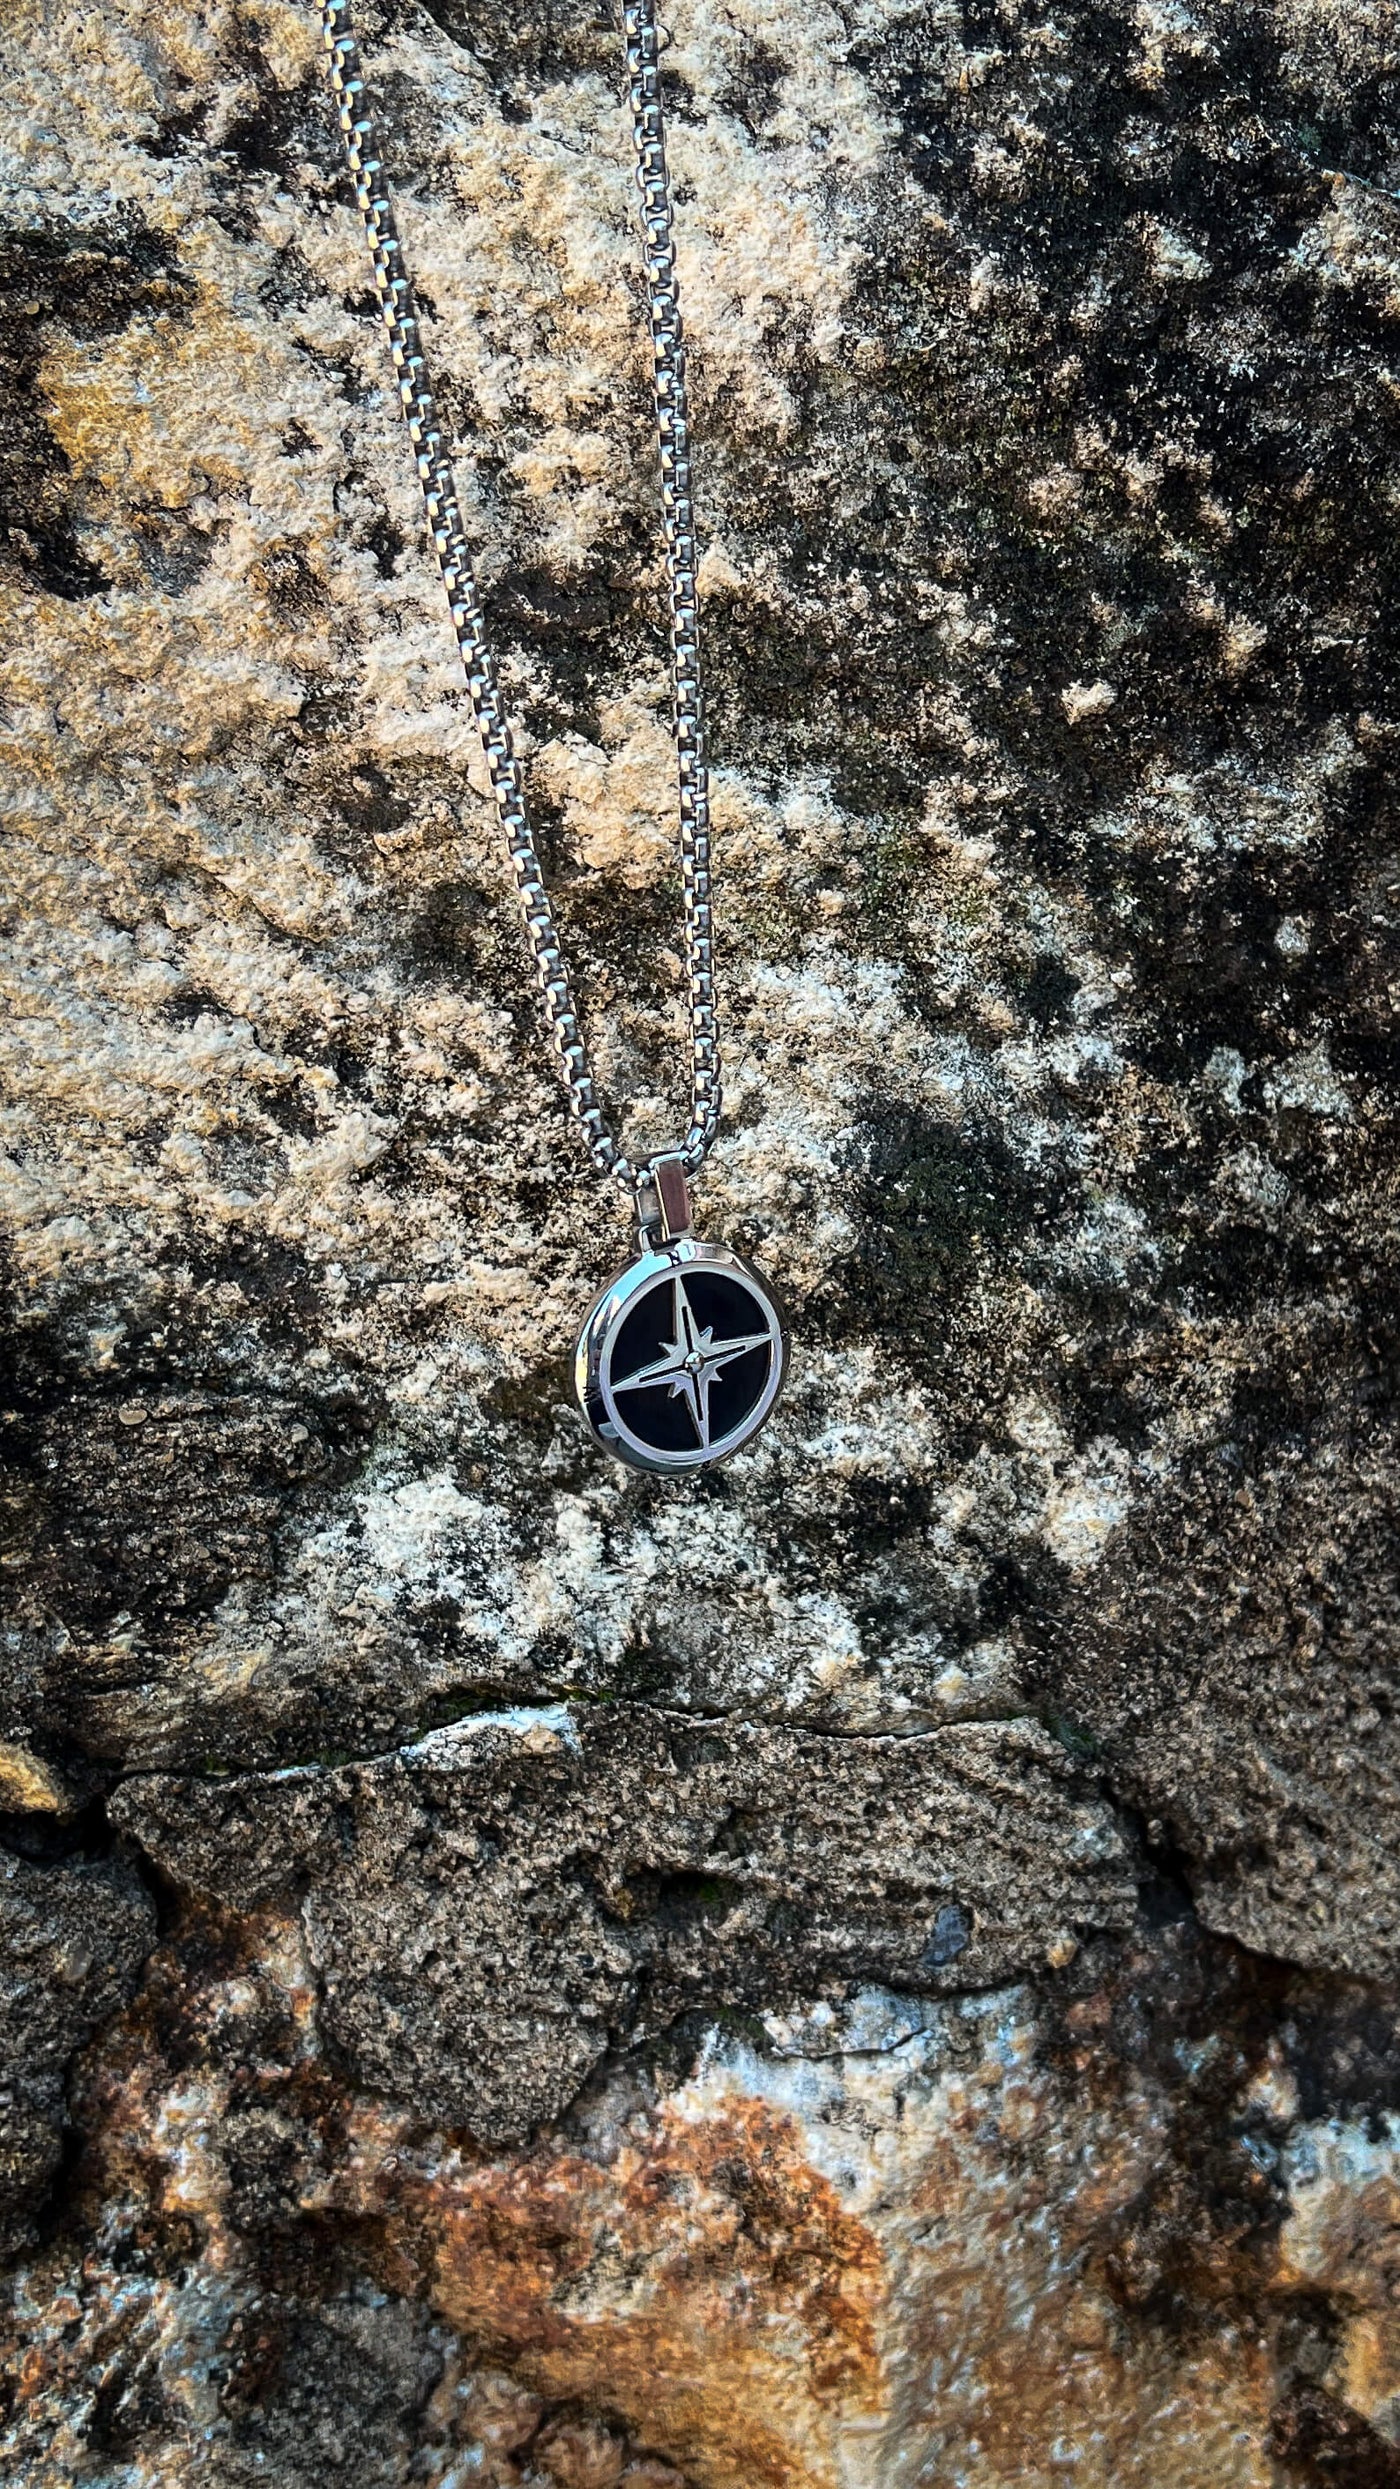 The Compass Necklace